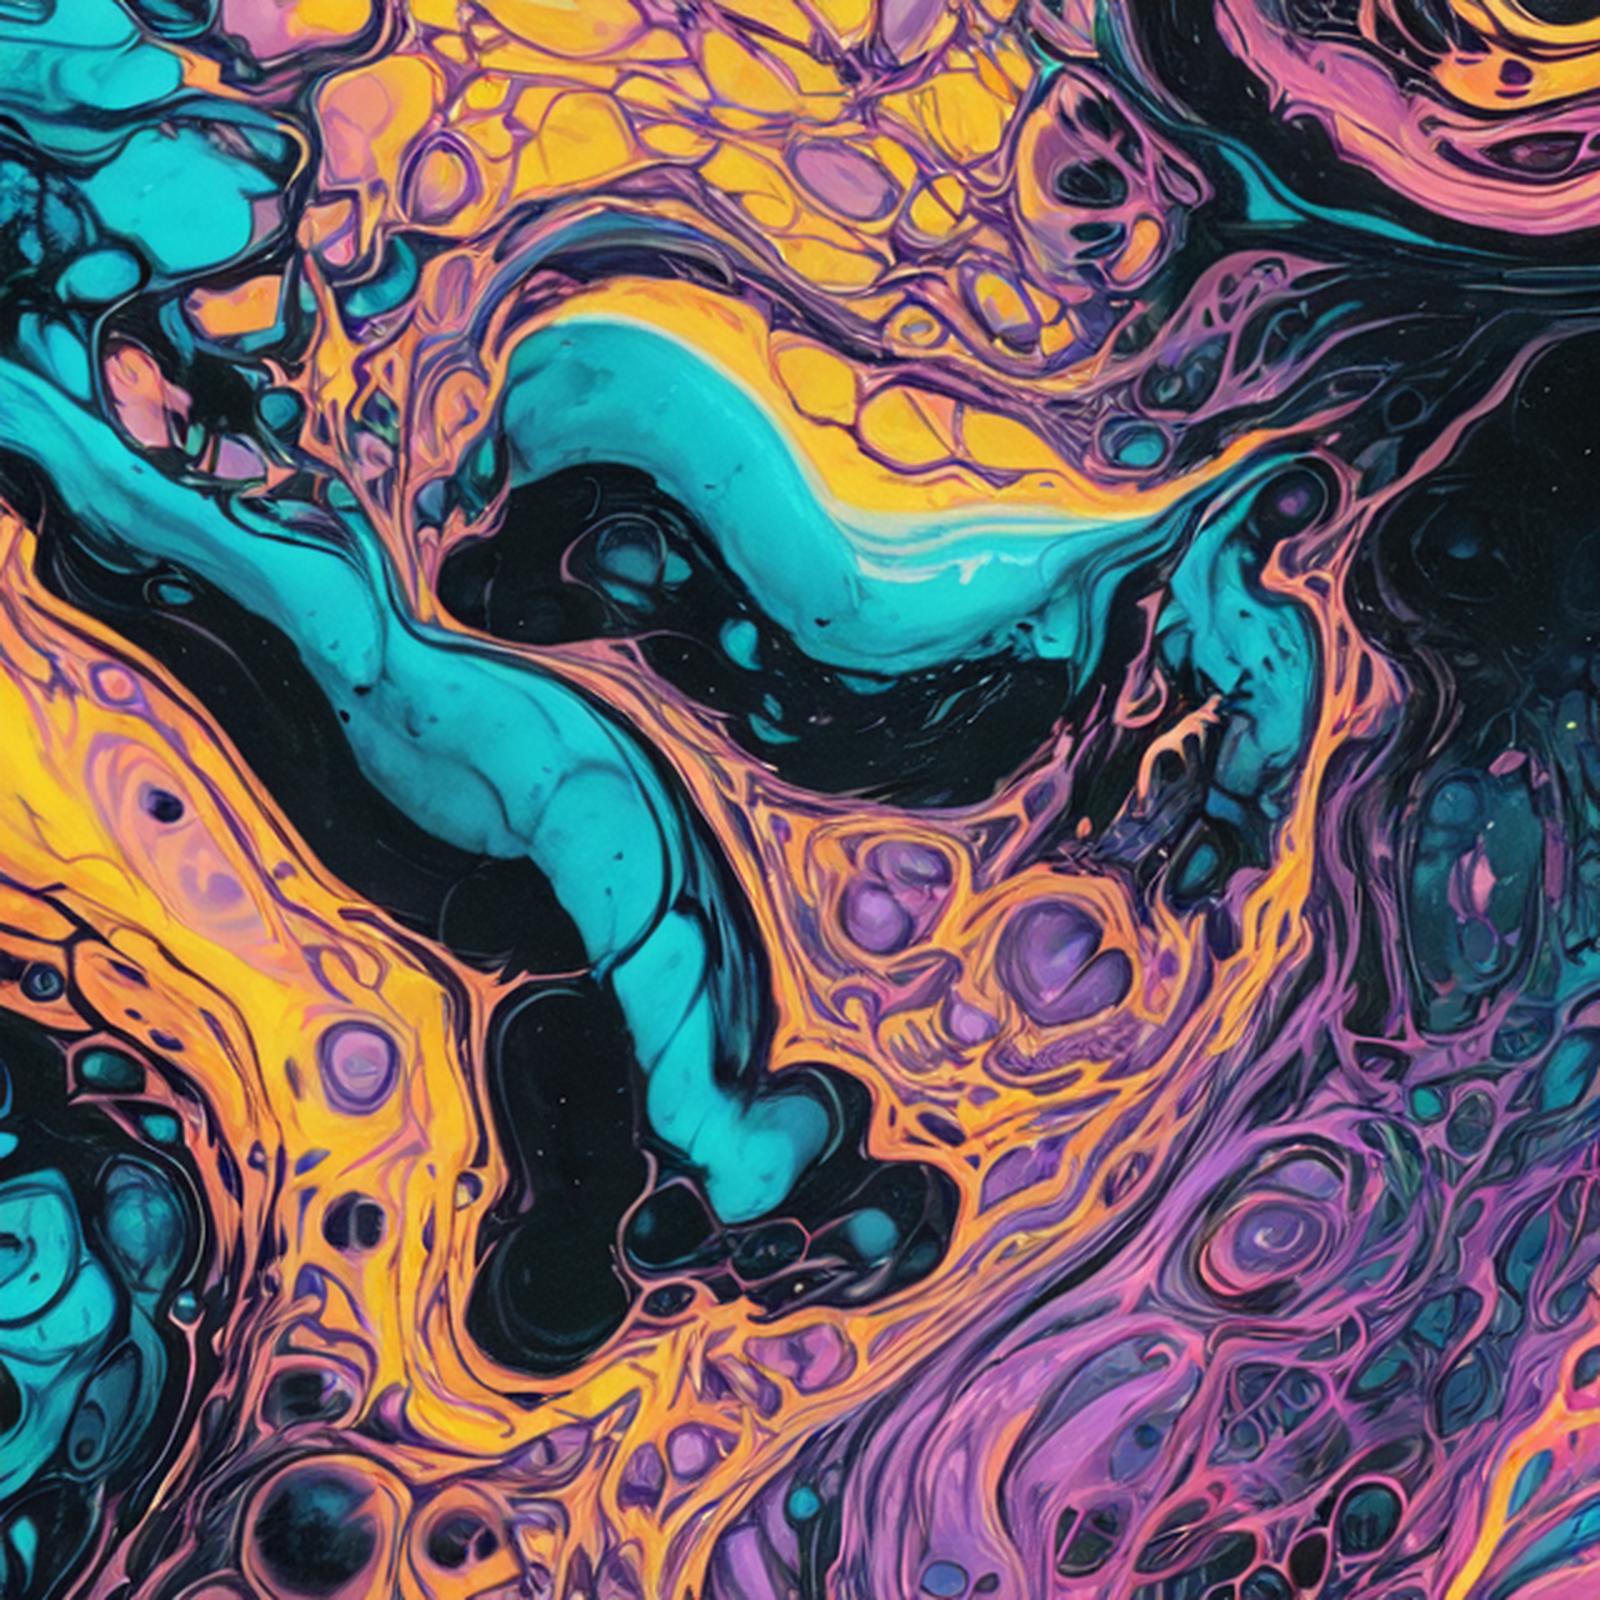 Psychedelic Fluids image by lawine